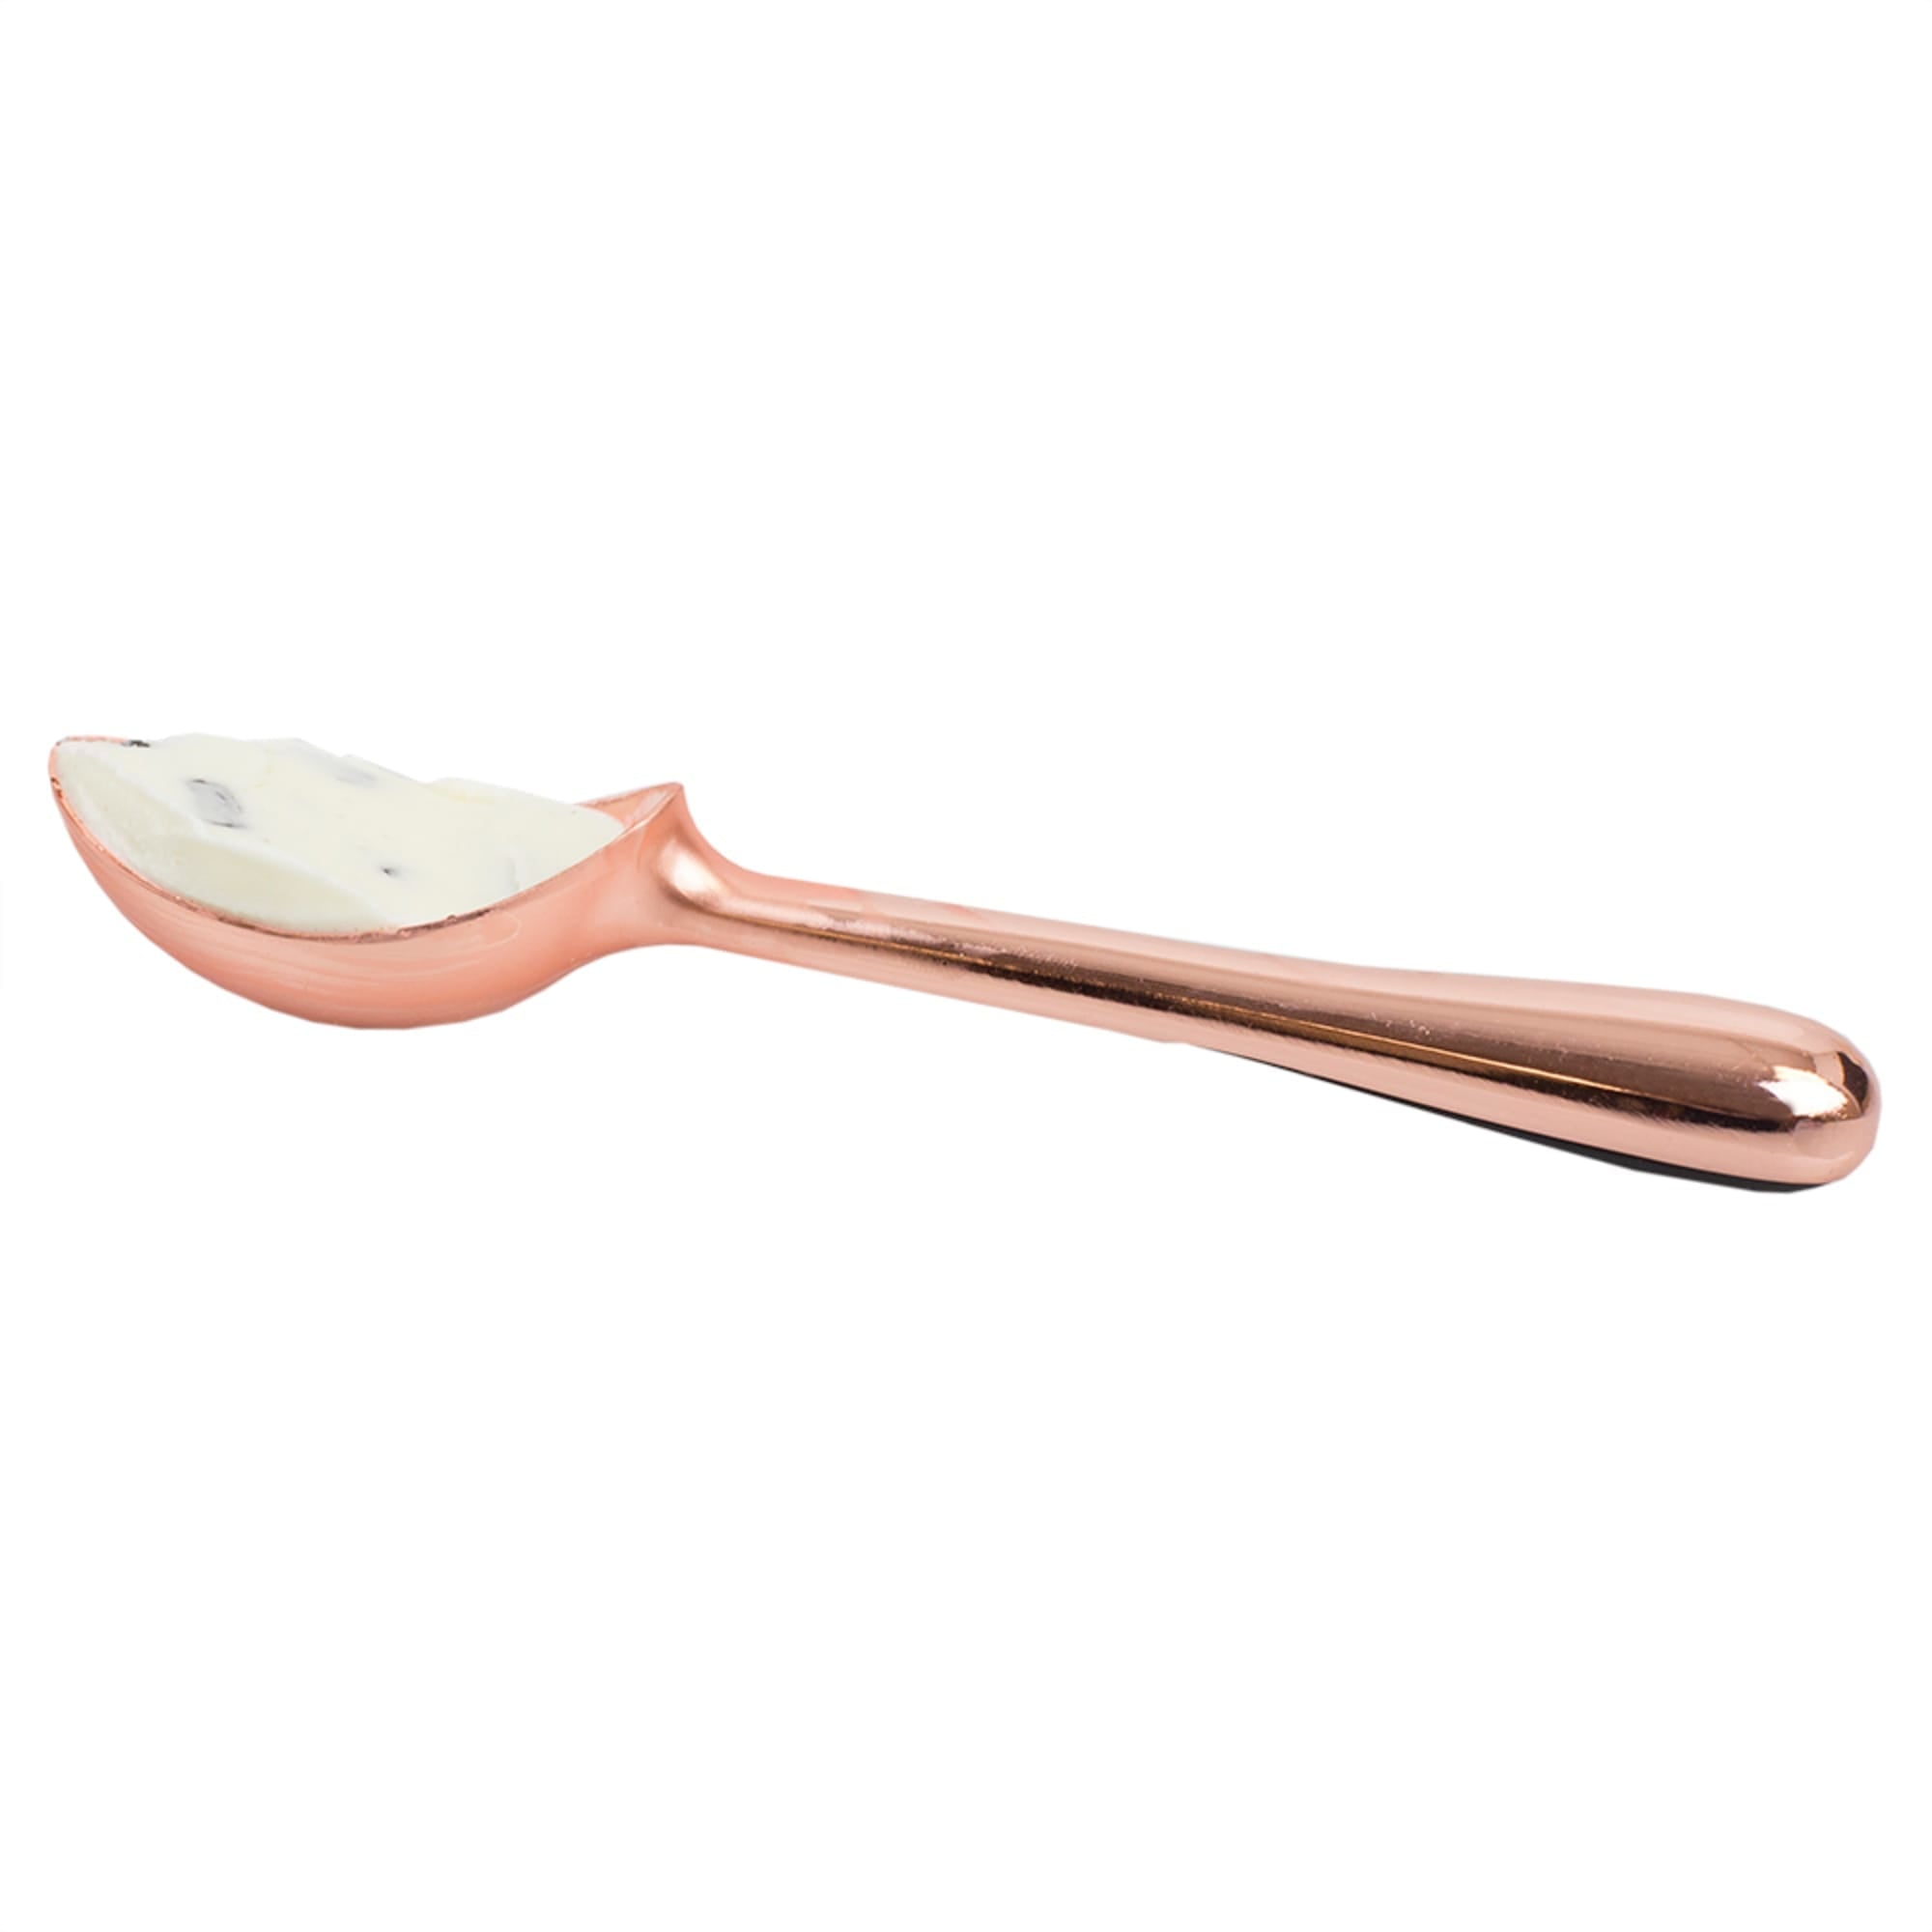 Home Basics Nova Collection Zinc Ice Cream Scoop, Rose Gold $4.00 EACH, CASE PACK OF 24